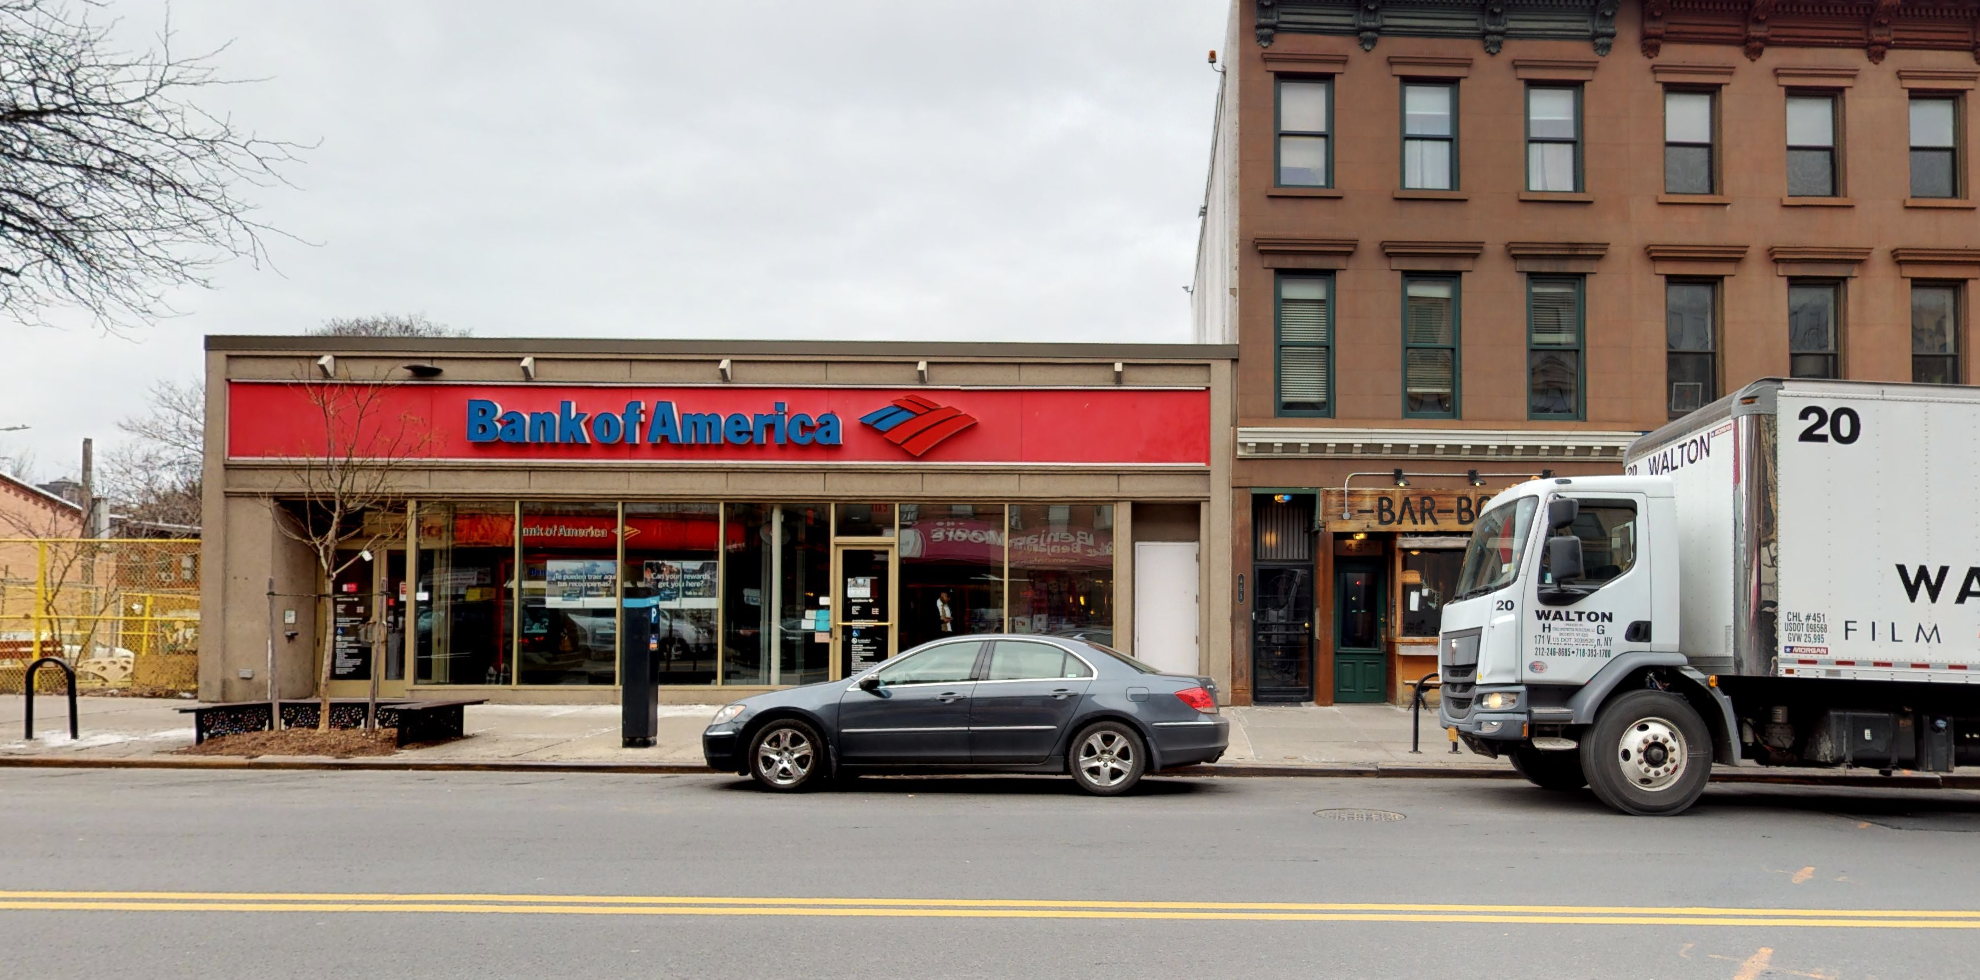 Bank of America financial center with walk-up ATM | 449 Myrtle Ave, Brooklyn, NY 11205